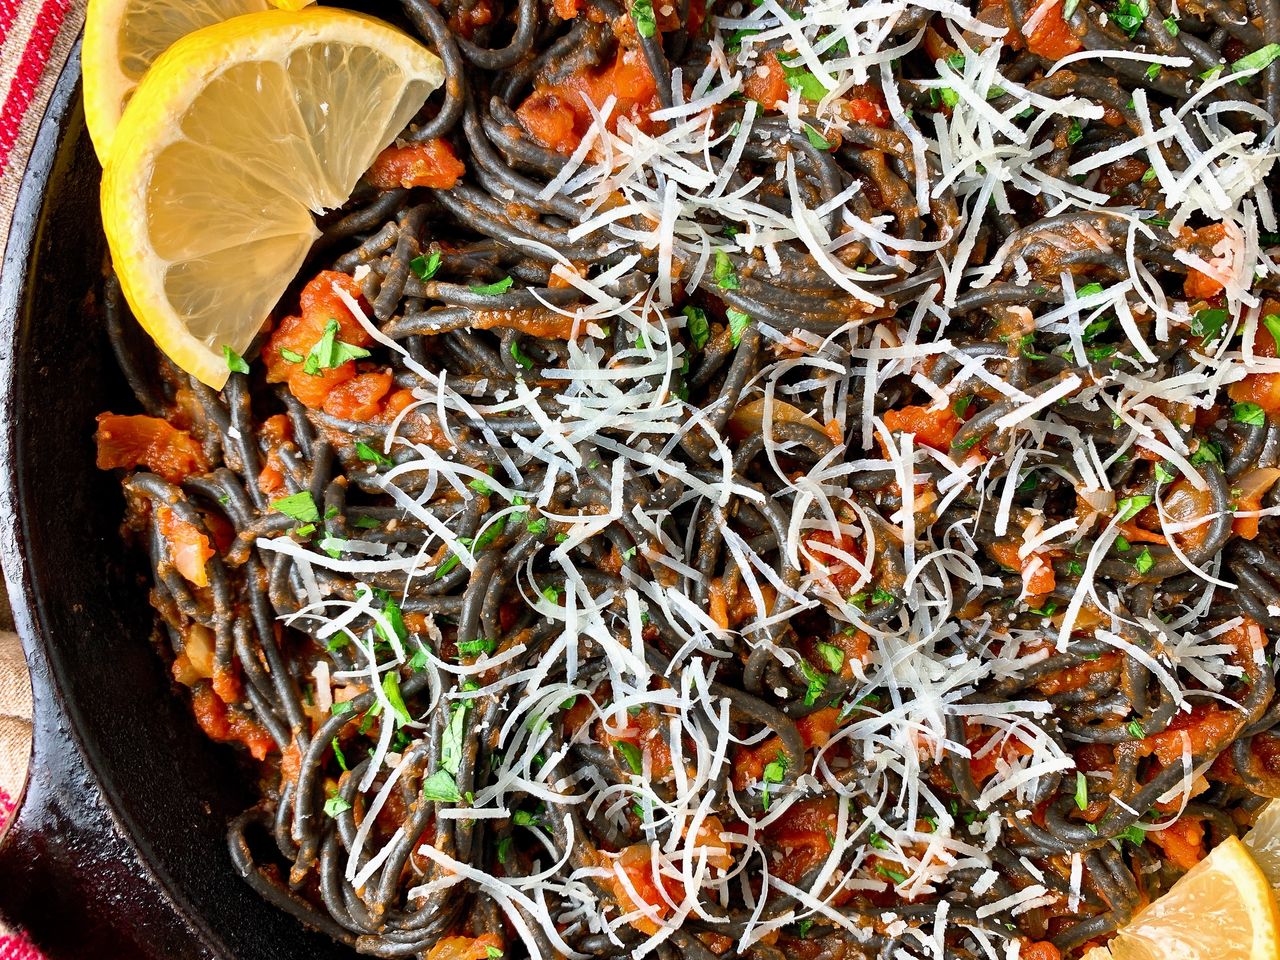 Squid Ink Pasta With Fiery Tomato Sauce